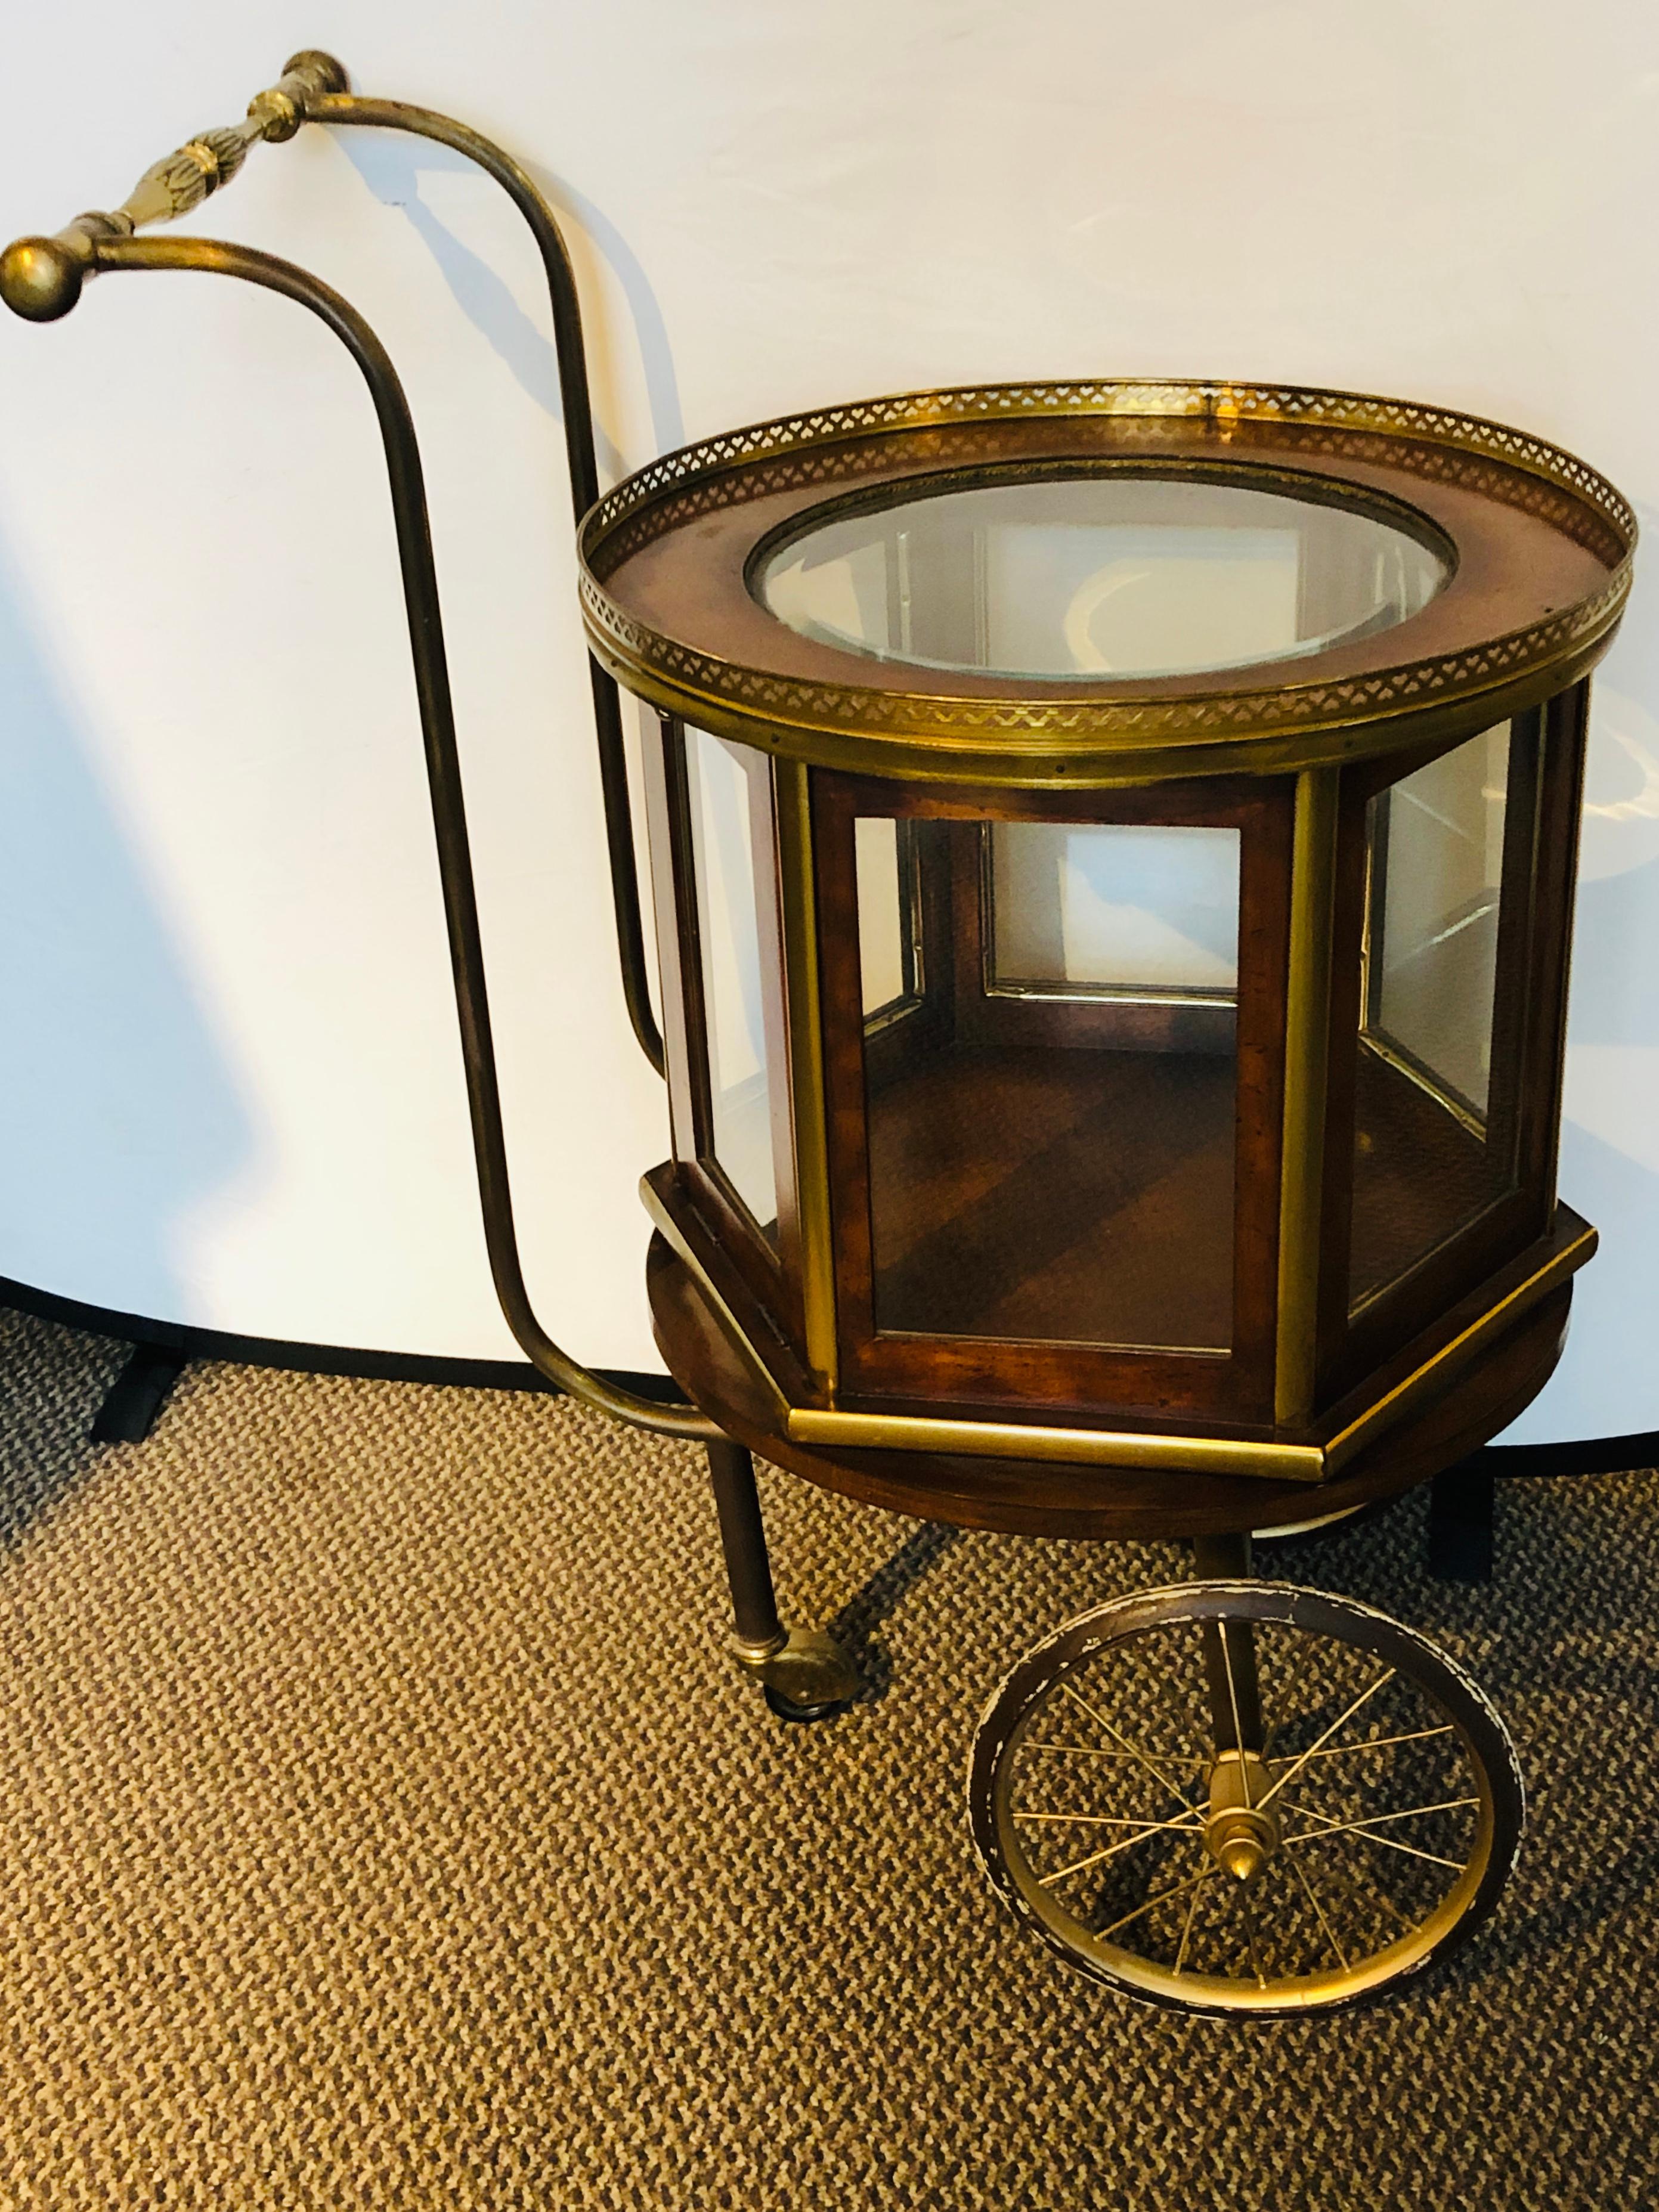 A Mid-Century Modern revolving serving cart or bar cart having beveled glass with fine bronze mounts. This stunning Mid-Century Modern bar cart is a must have for any serving occasion. The fully revolving top has two opening doors with a showcase